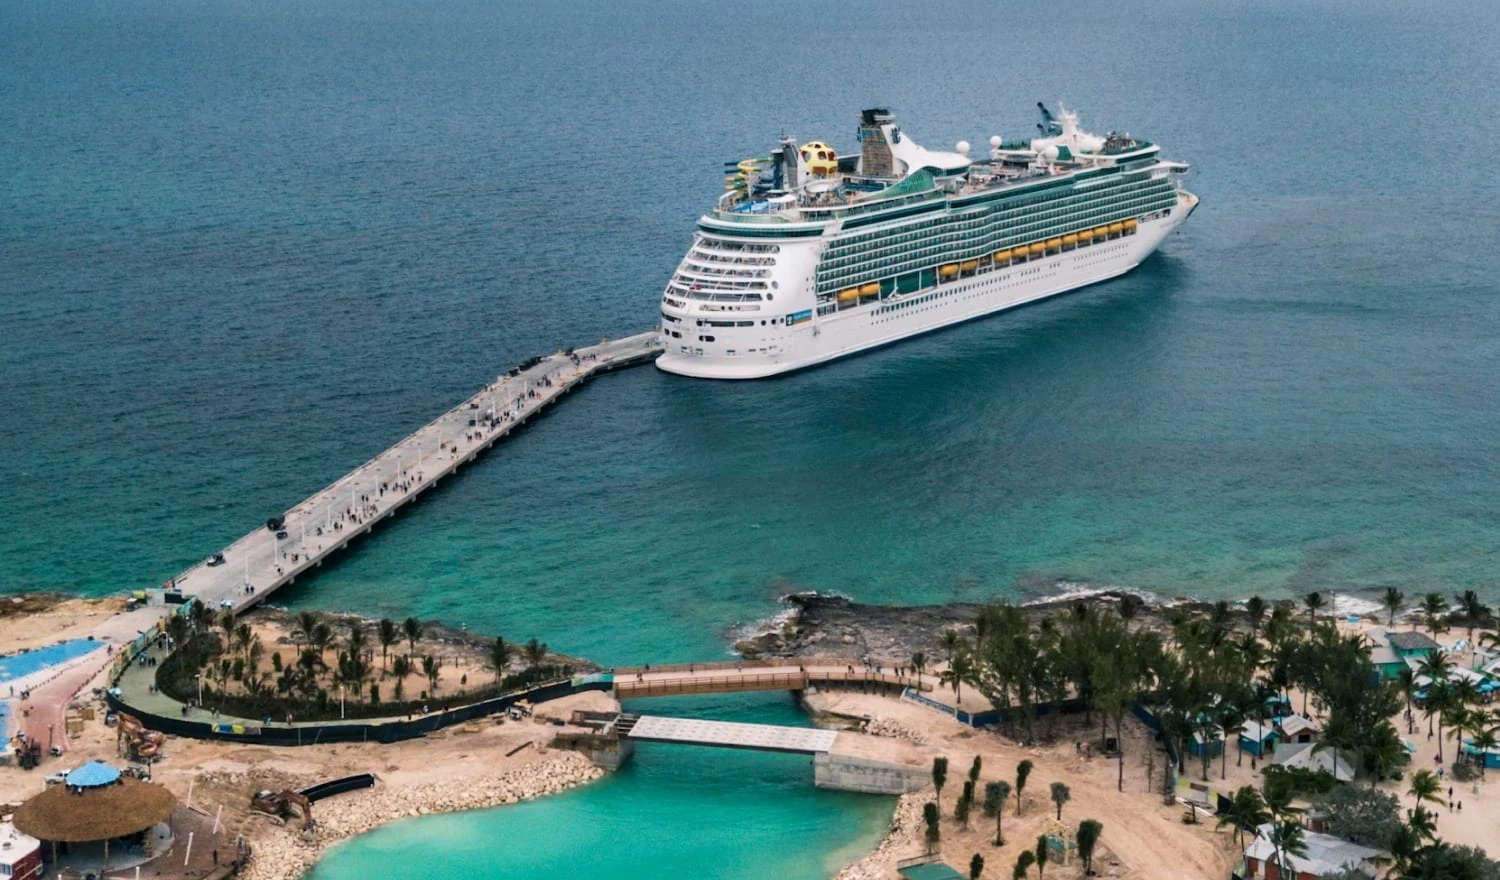 Cruise ship docked at a beautiful location